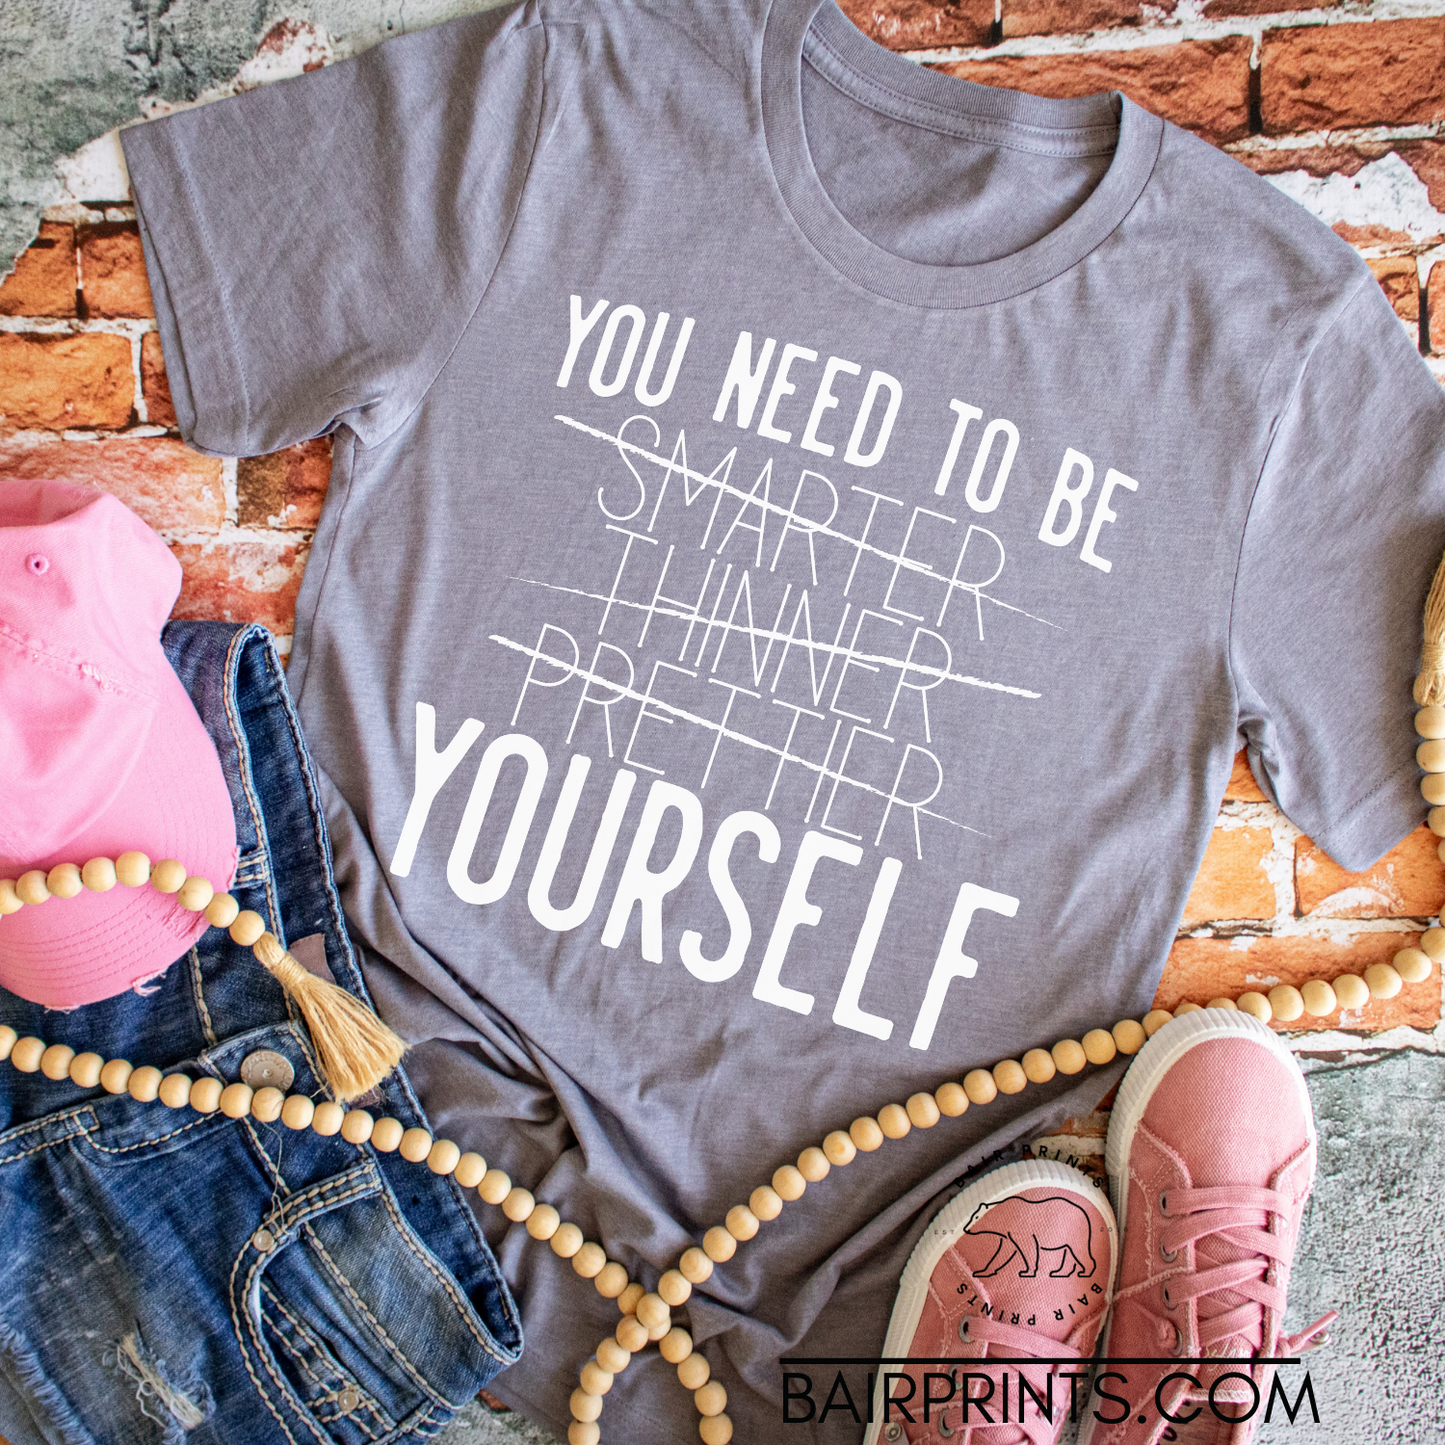 You Need to be Smarter, Thinner, Prettier, Yourself Tee